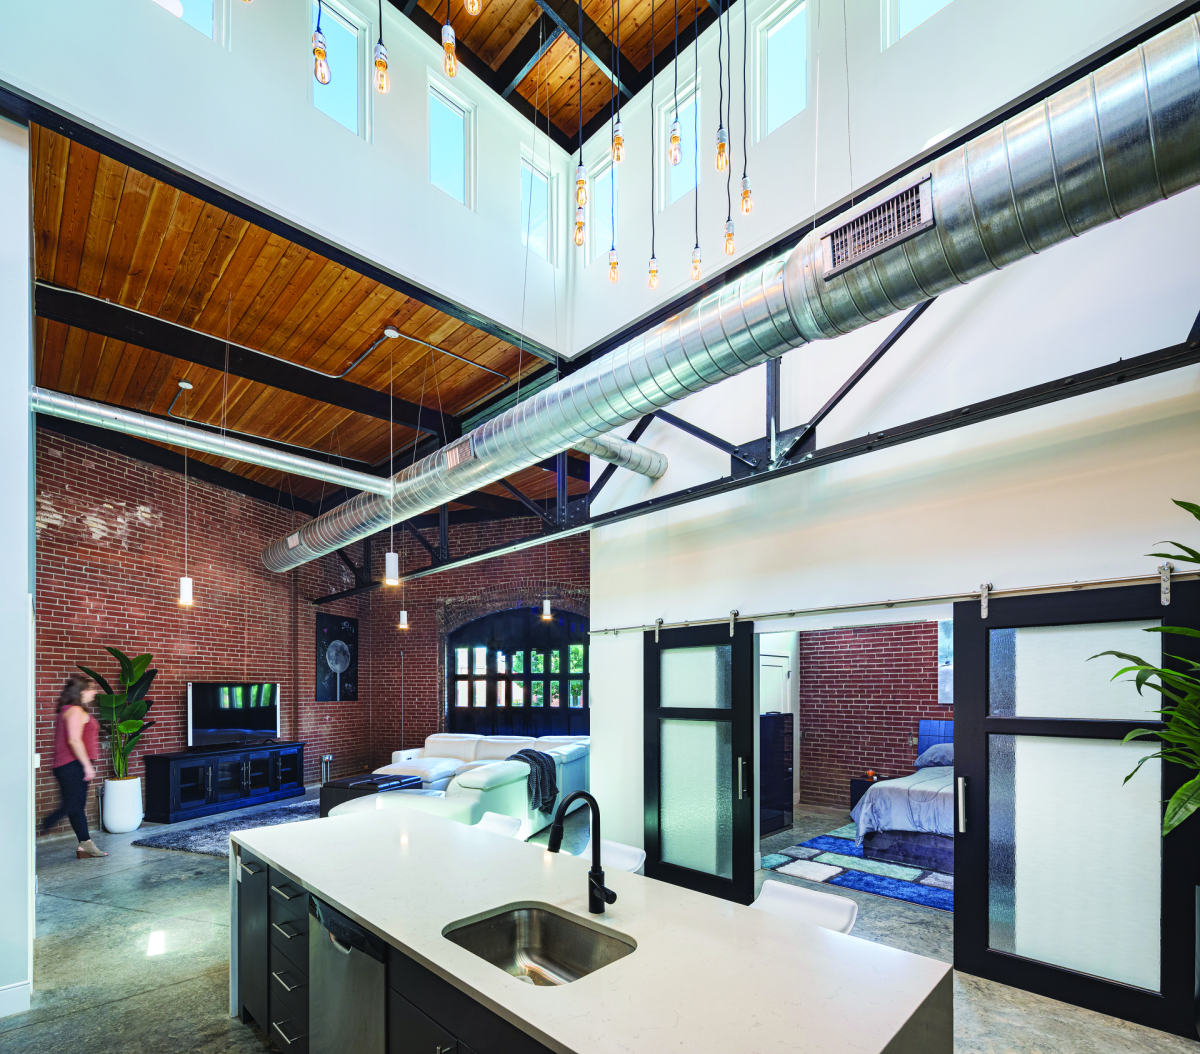 Two loft-like apartments were created in the Garage Building. The original over-wide door opening, where ambulances entered, leads to a private patio. A roof monitor in one unit provides natural light.